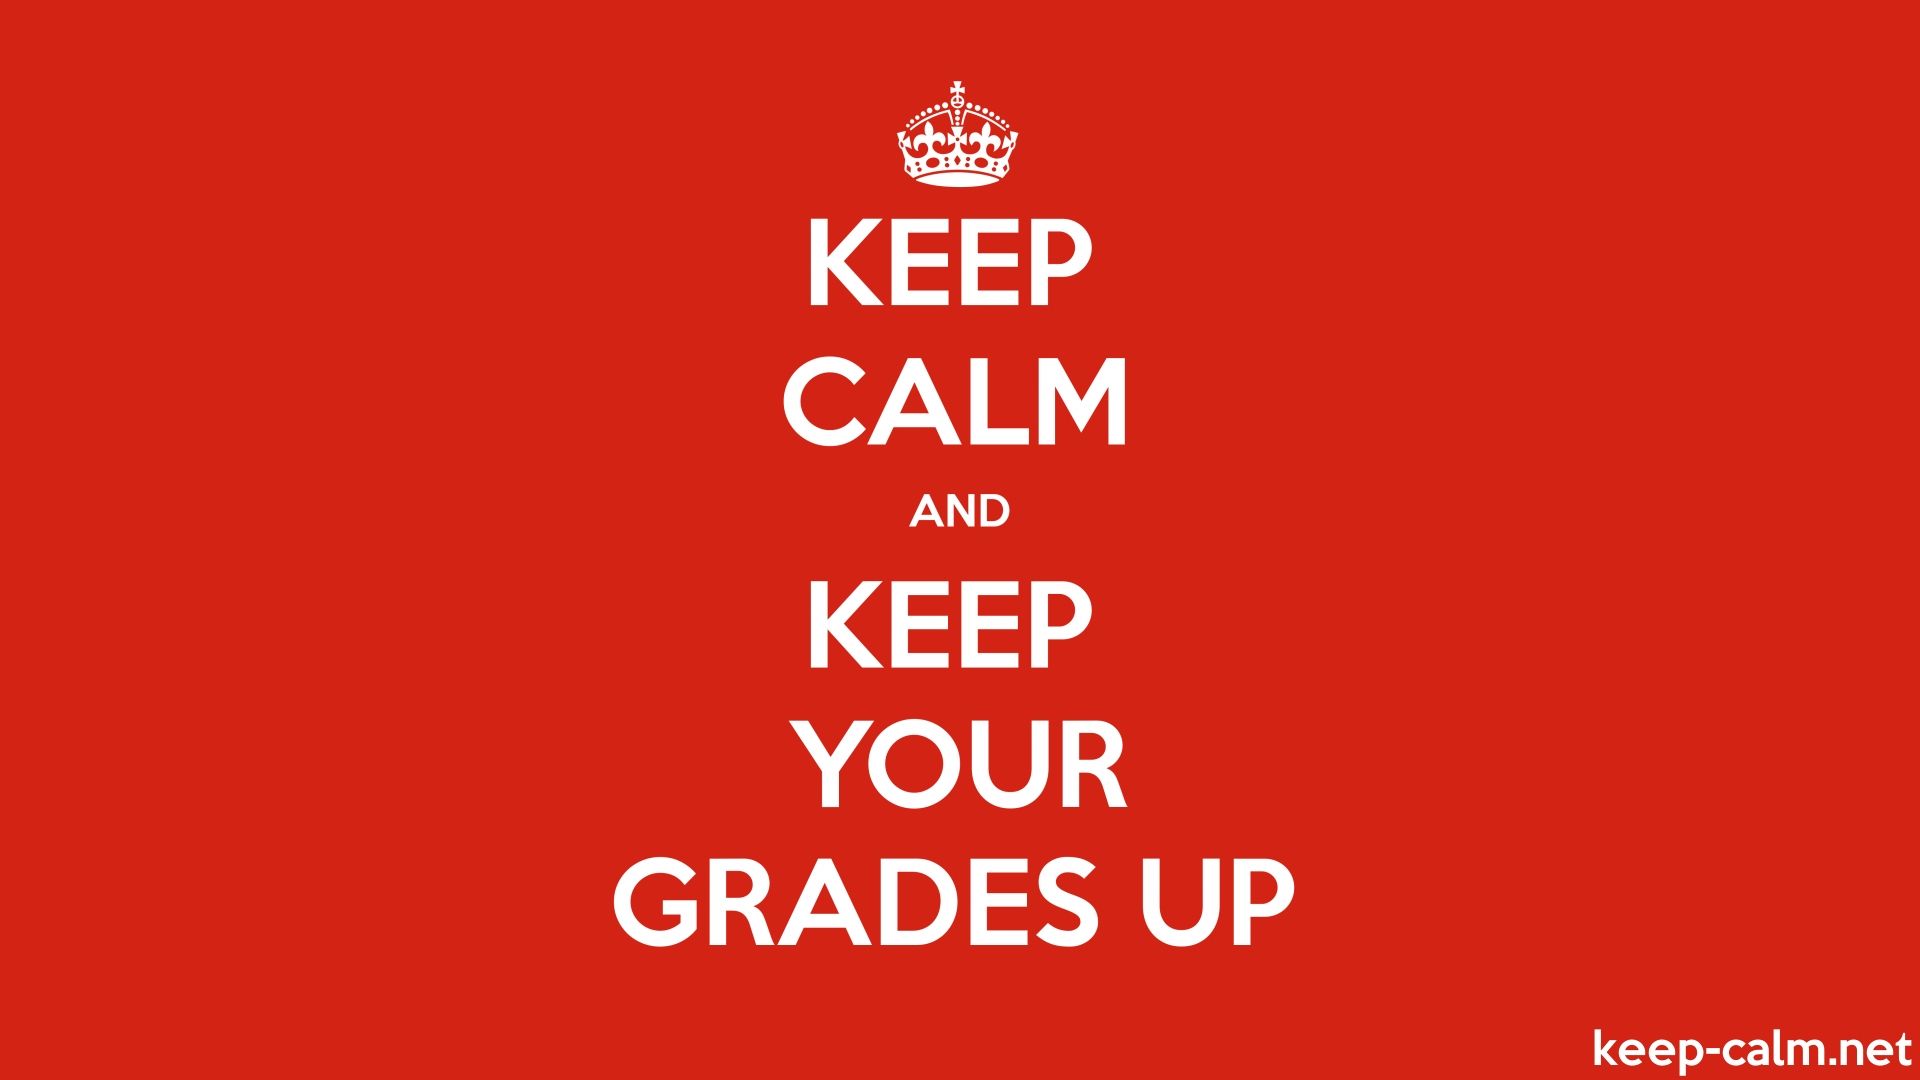 KEEP CALM AND KEEP YOUR GRADES UP